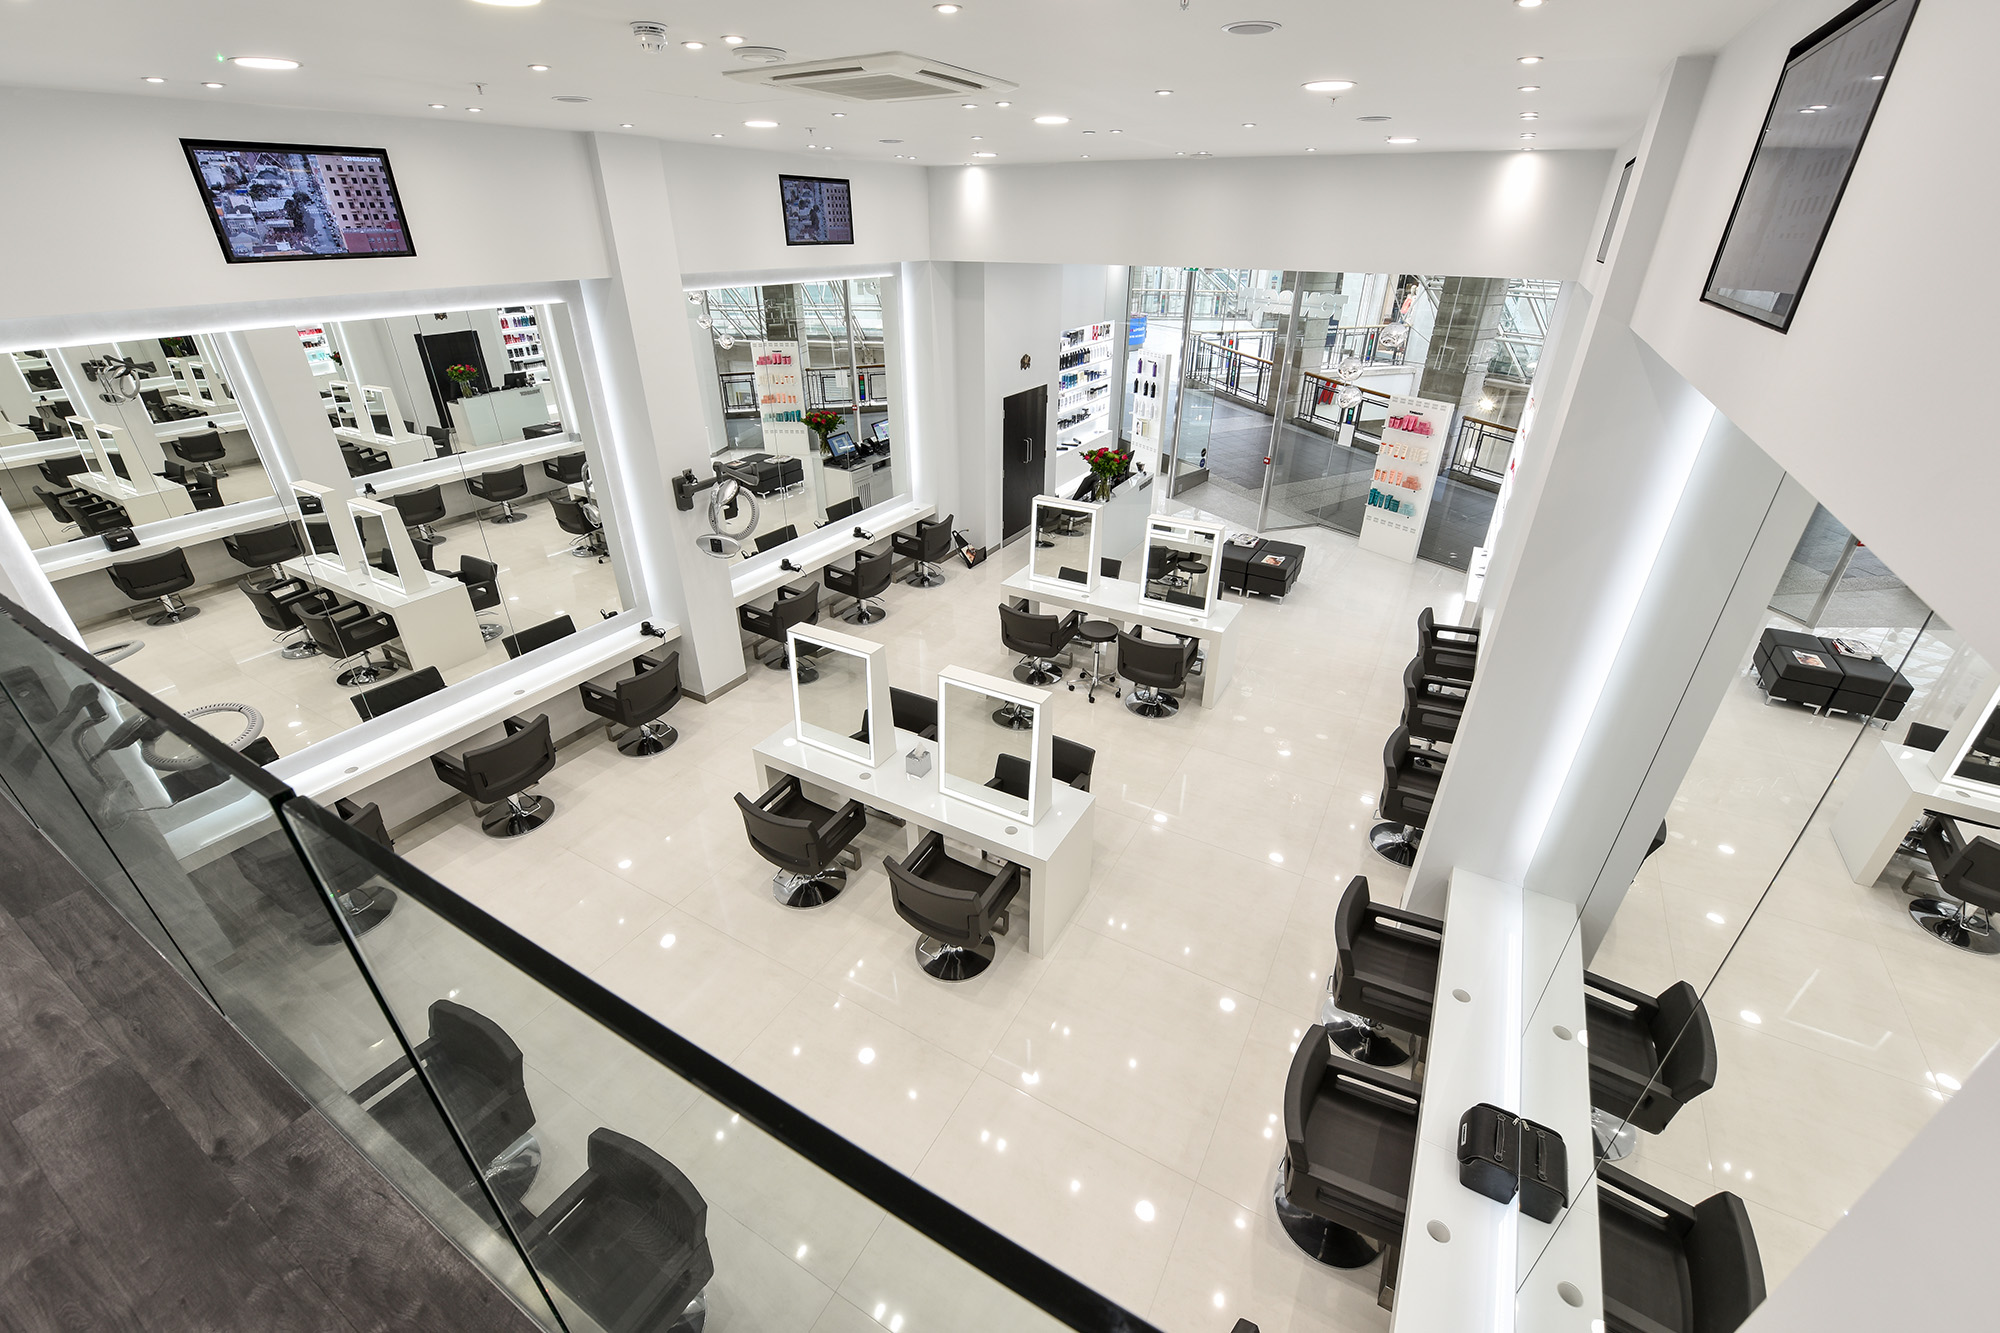 Premier Interior Systems - Toni and Guy - Interior Fit Out Refurbishment Retail Bespoke